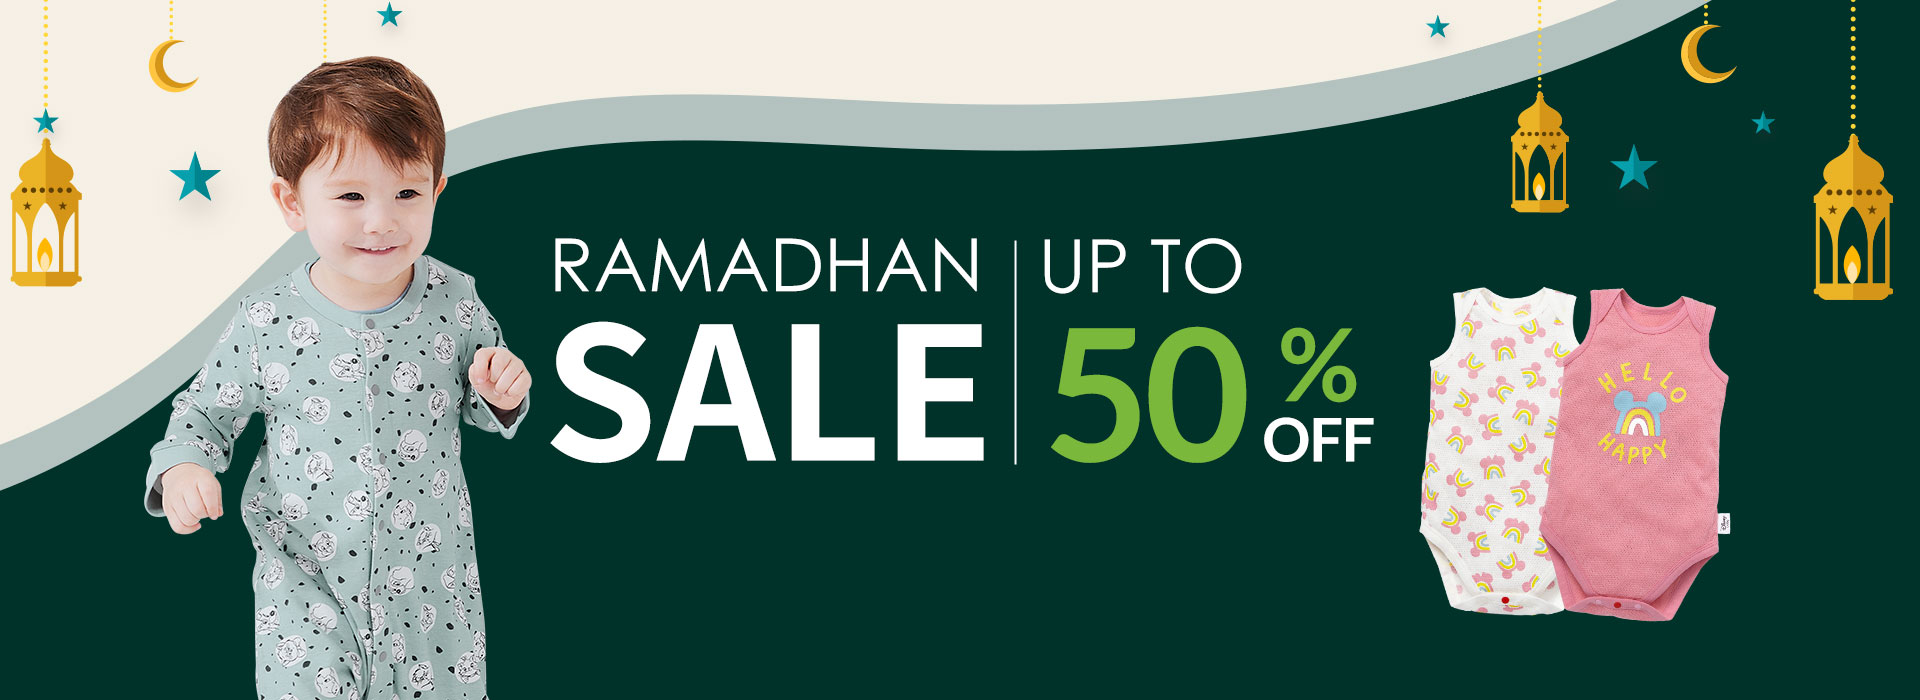 Ramadhan SALE Up To 50% OFF